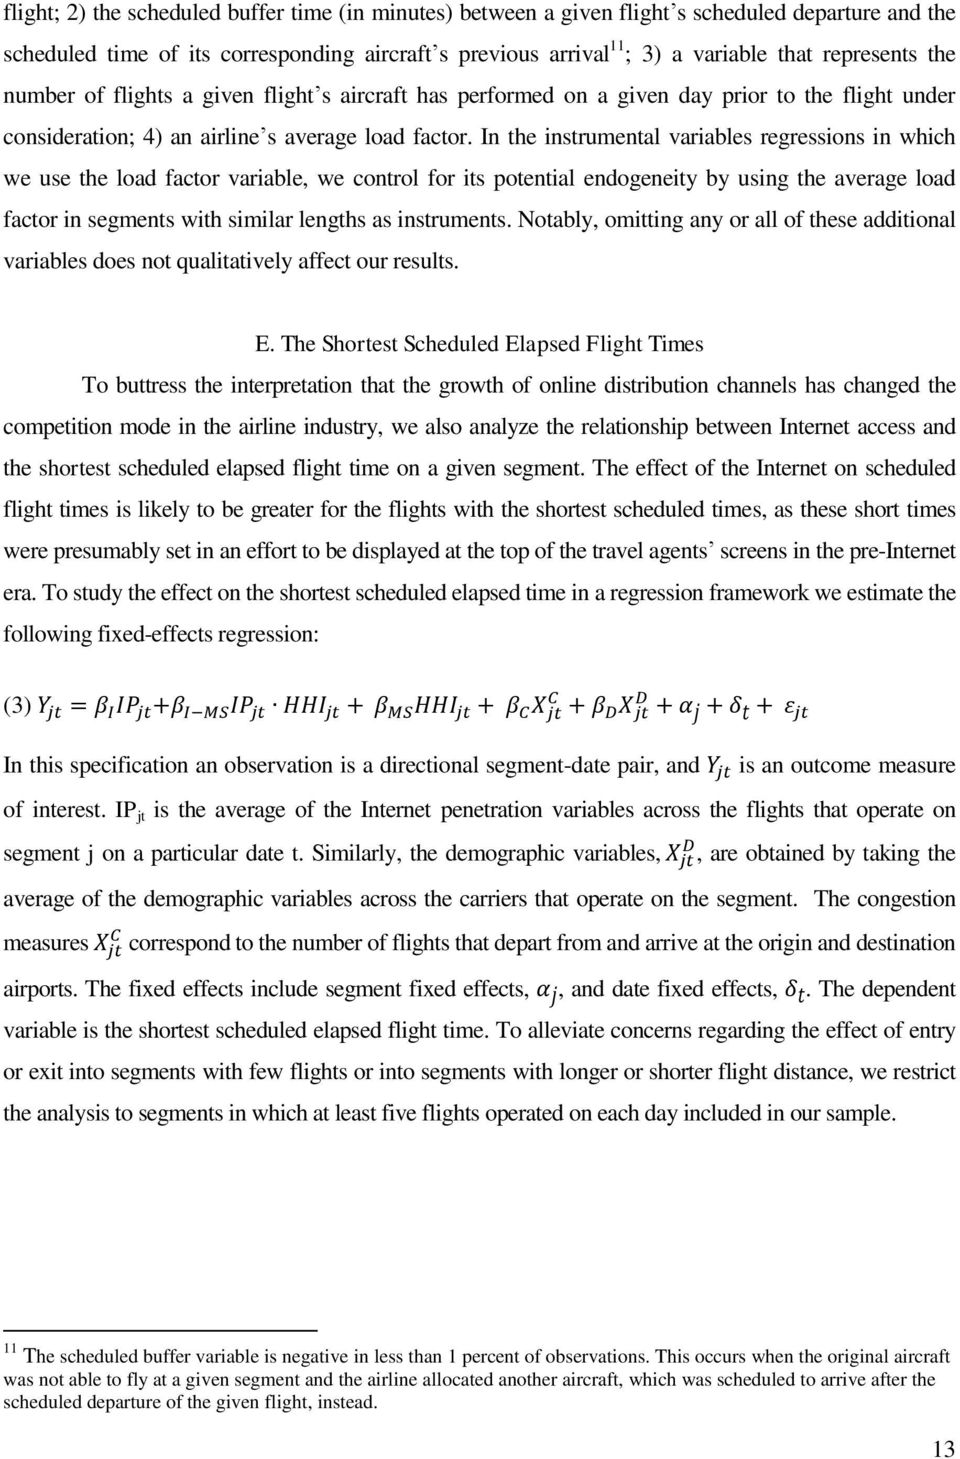 In the instrumental variables regressions in which we use the load factor variable, we control for its potential endogeneity by using the average load factor in segments with similar lengths as